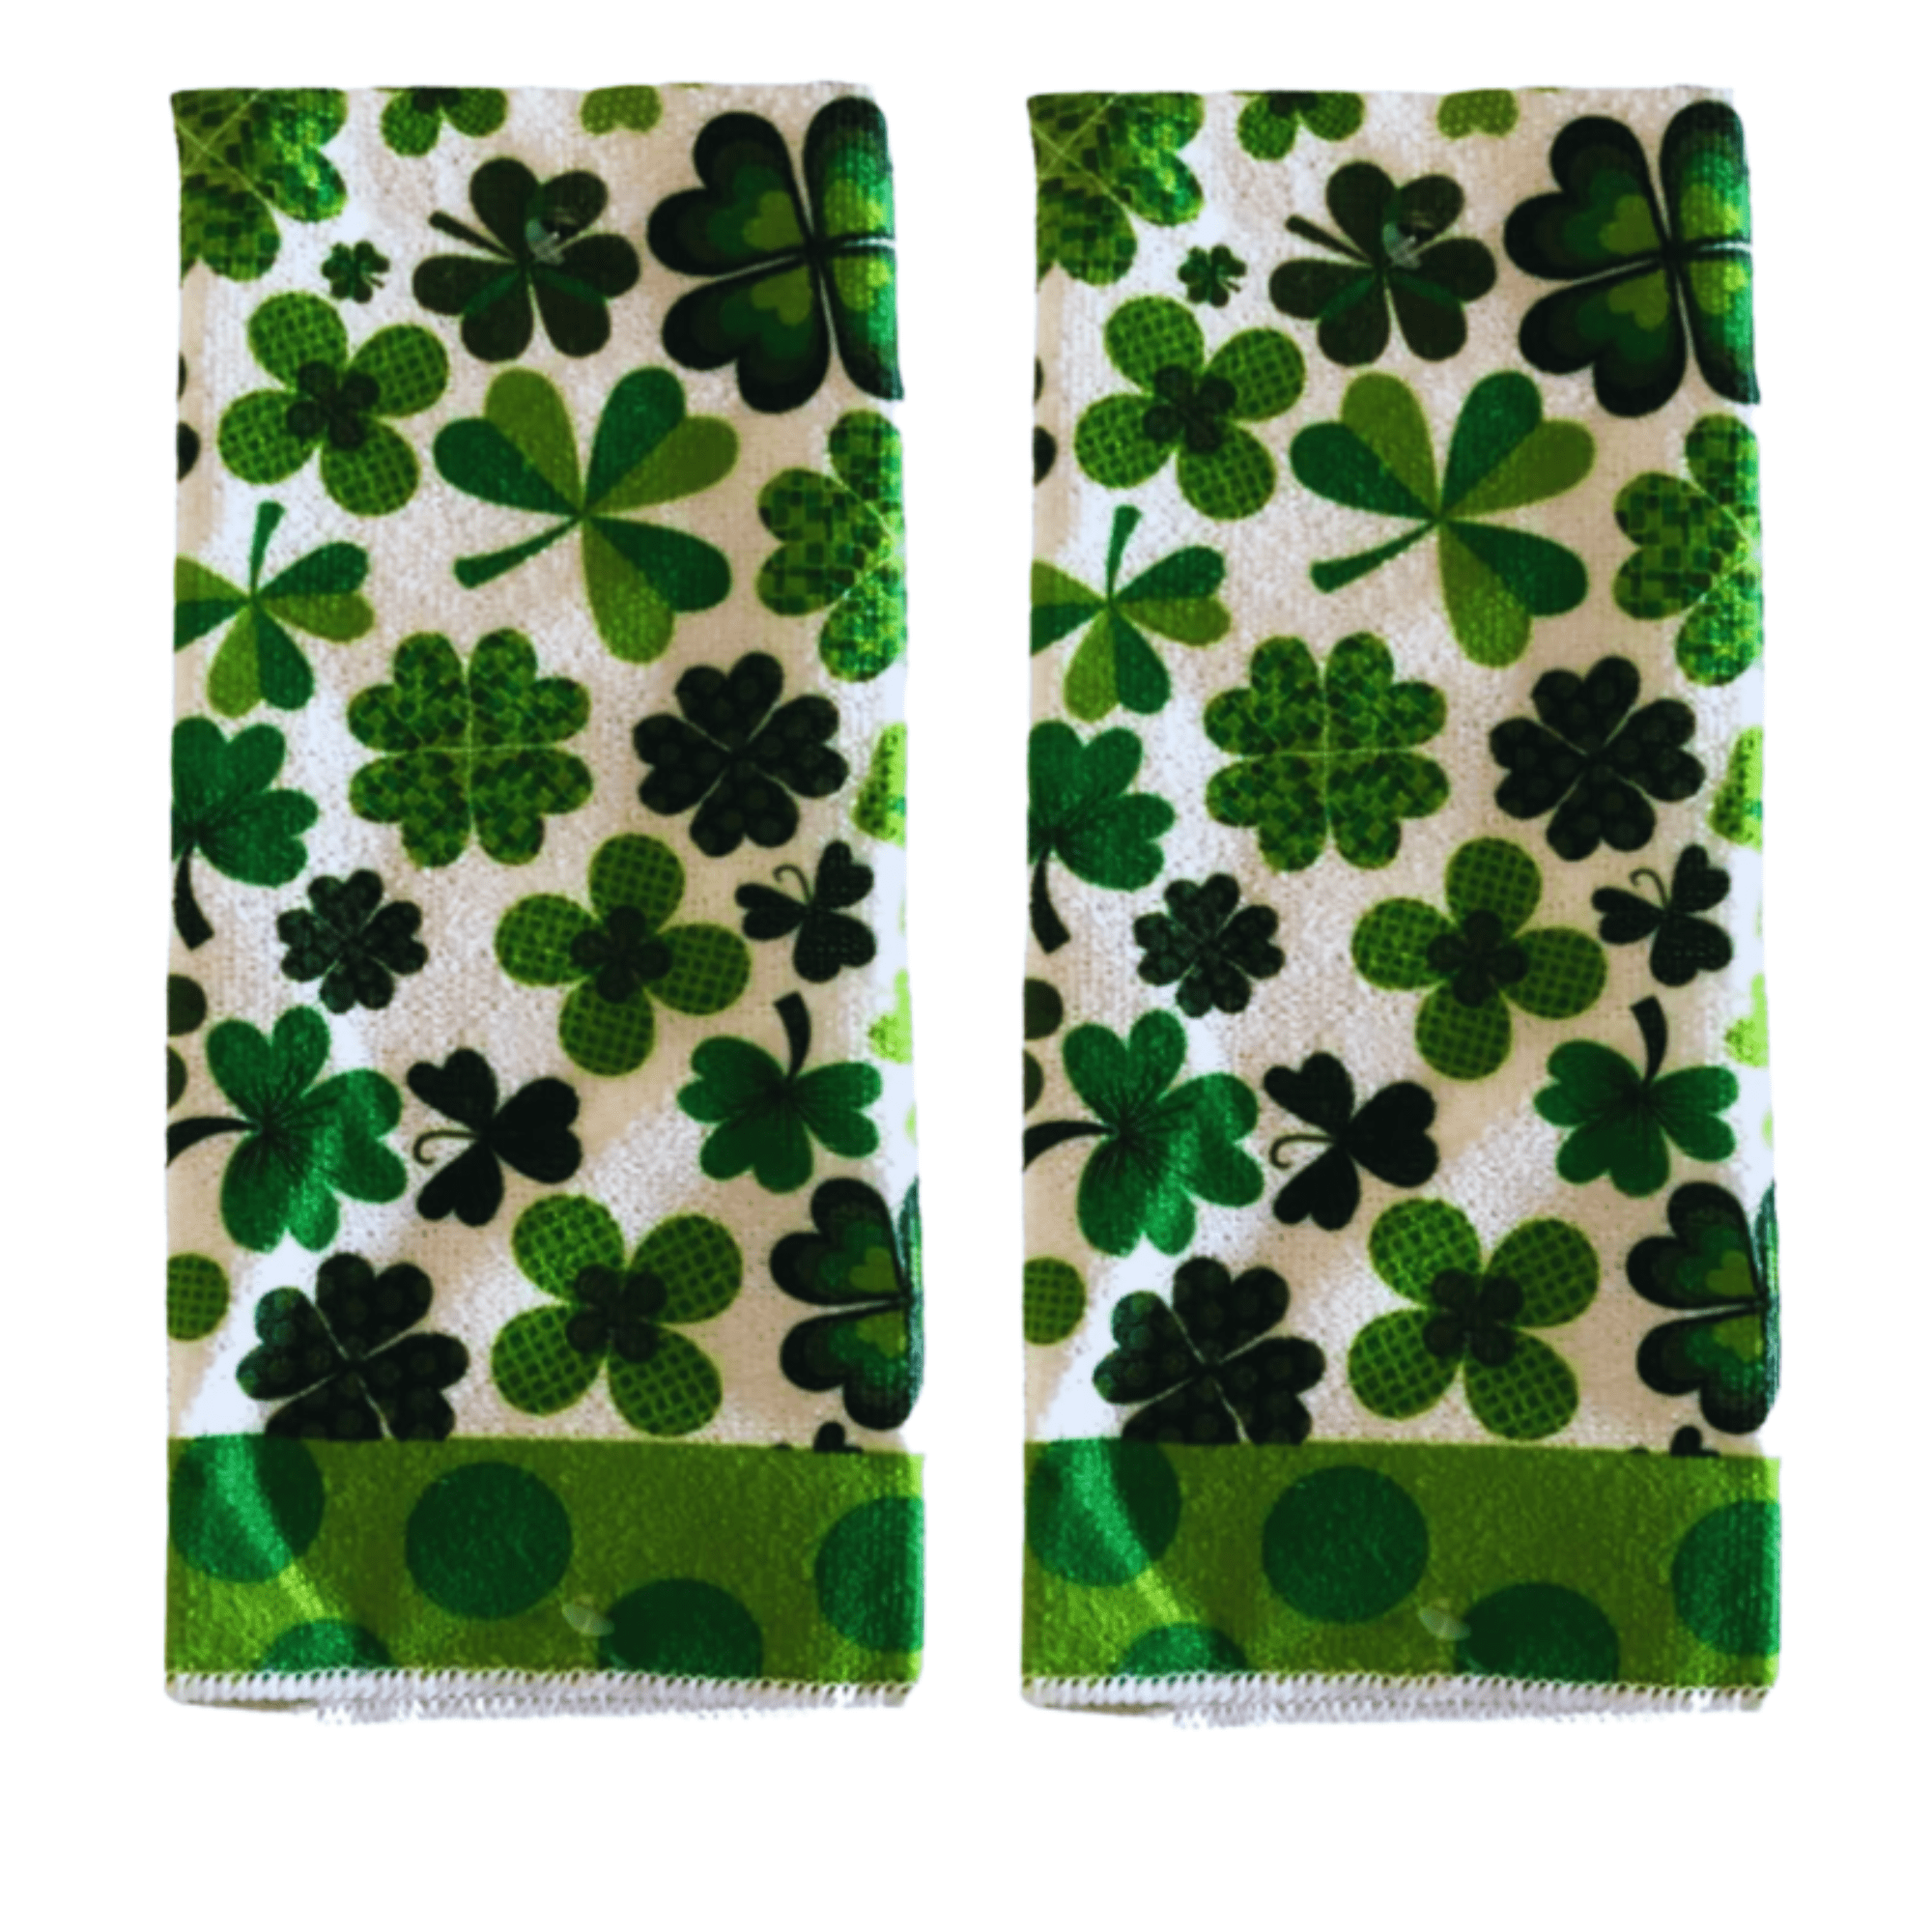 Patricks Day 6 Piece Kitchen Gift Set Mainstream St 1 Pot Holder 2 Kitchen Towels 1 Oven Mitt and 2 Four Leaf Clover Picks Blessed and Lucky - Black/White/Green/Gray 